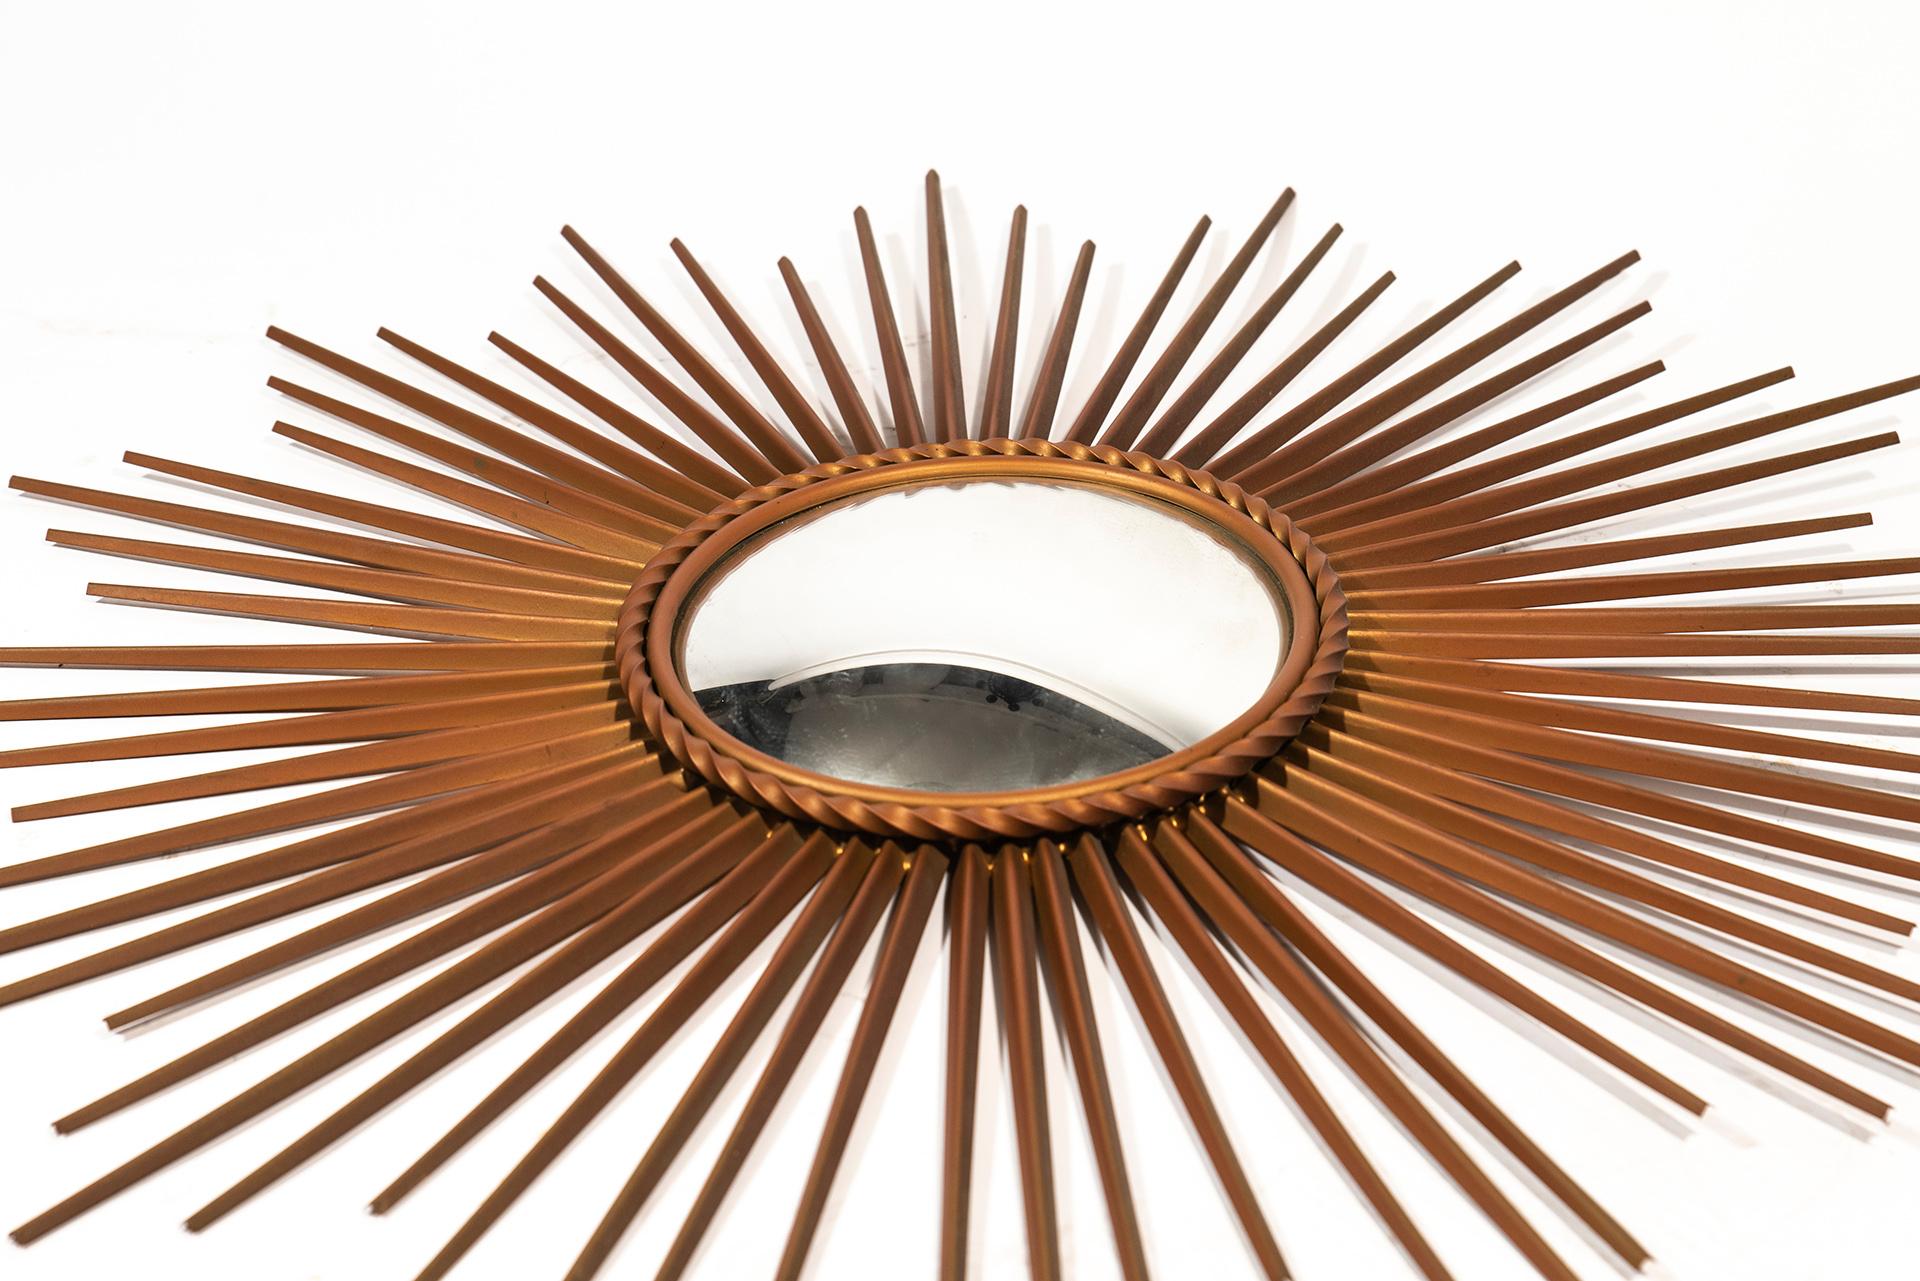 Chaty Vallauris, wall mirror,
metal gilted, signed,
circa 1970, France.
Measure: Height 71 cm, diameter 71 cm.